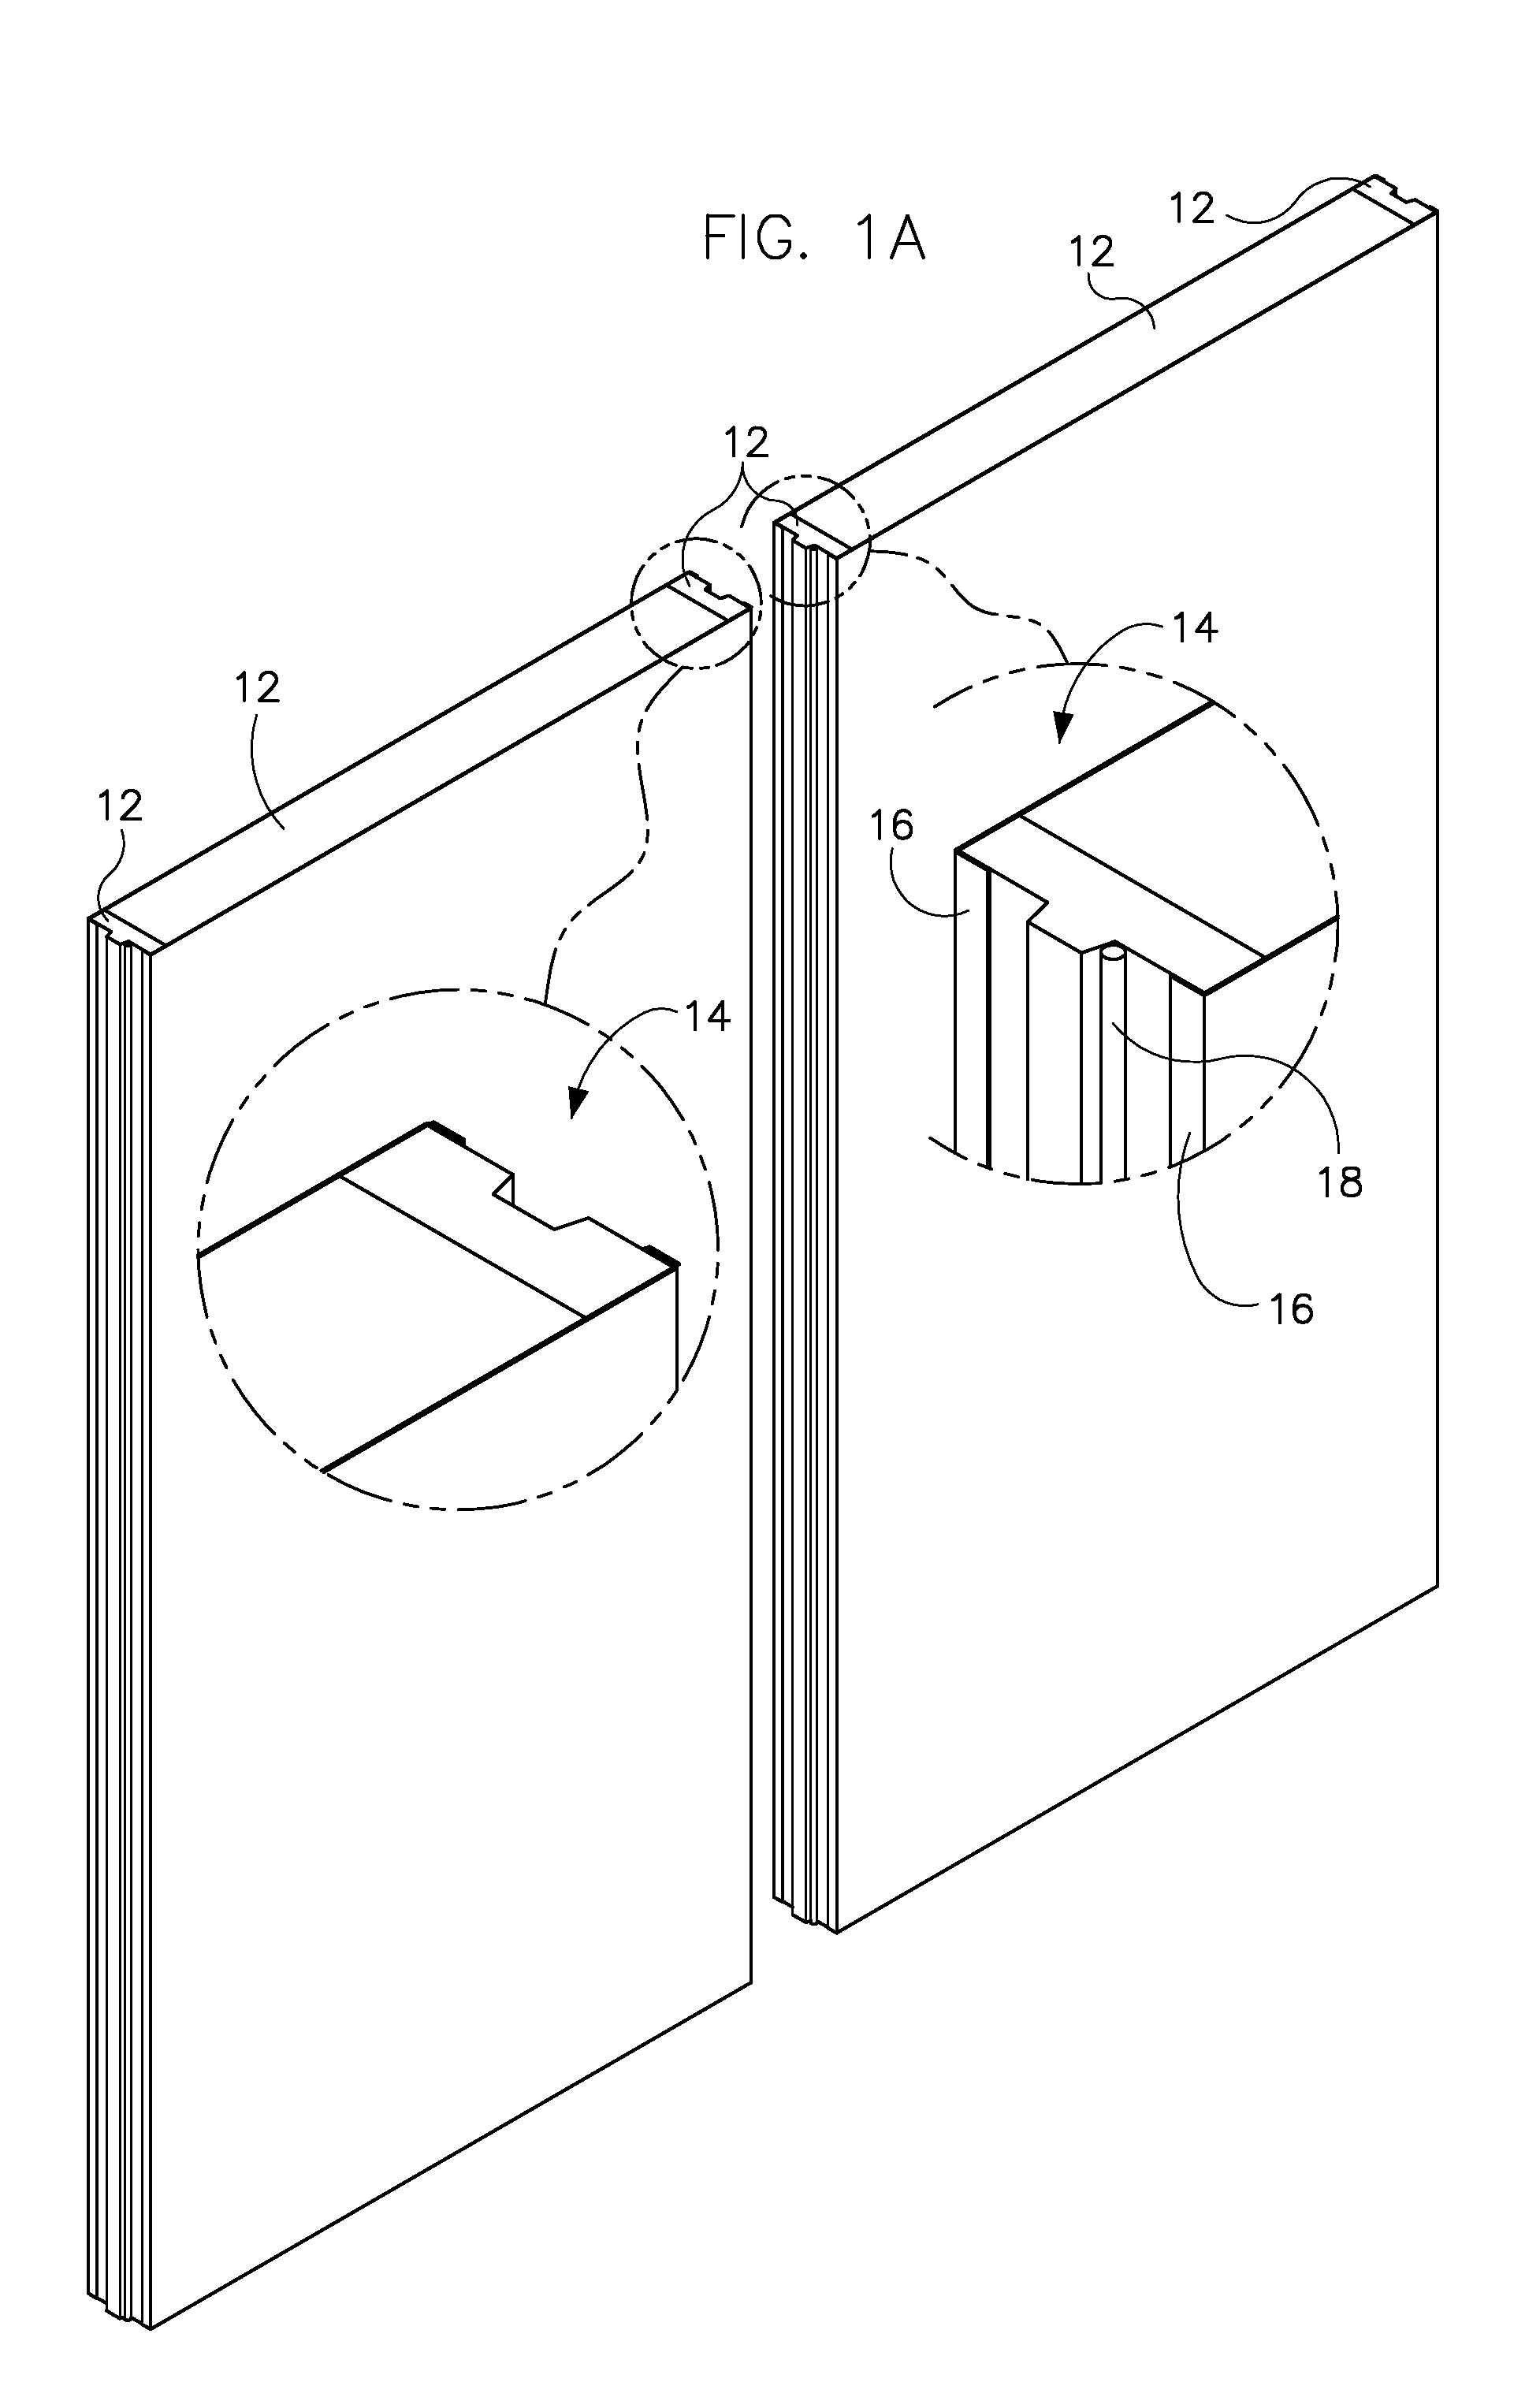 Structural insulated panel system